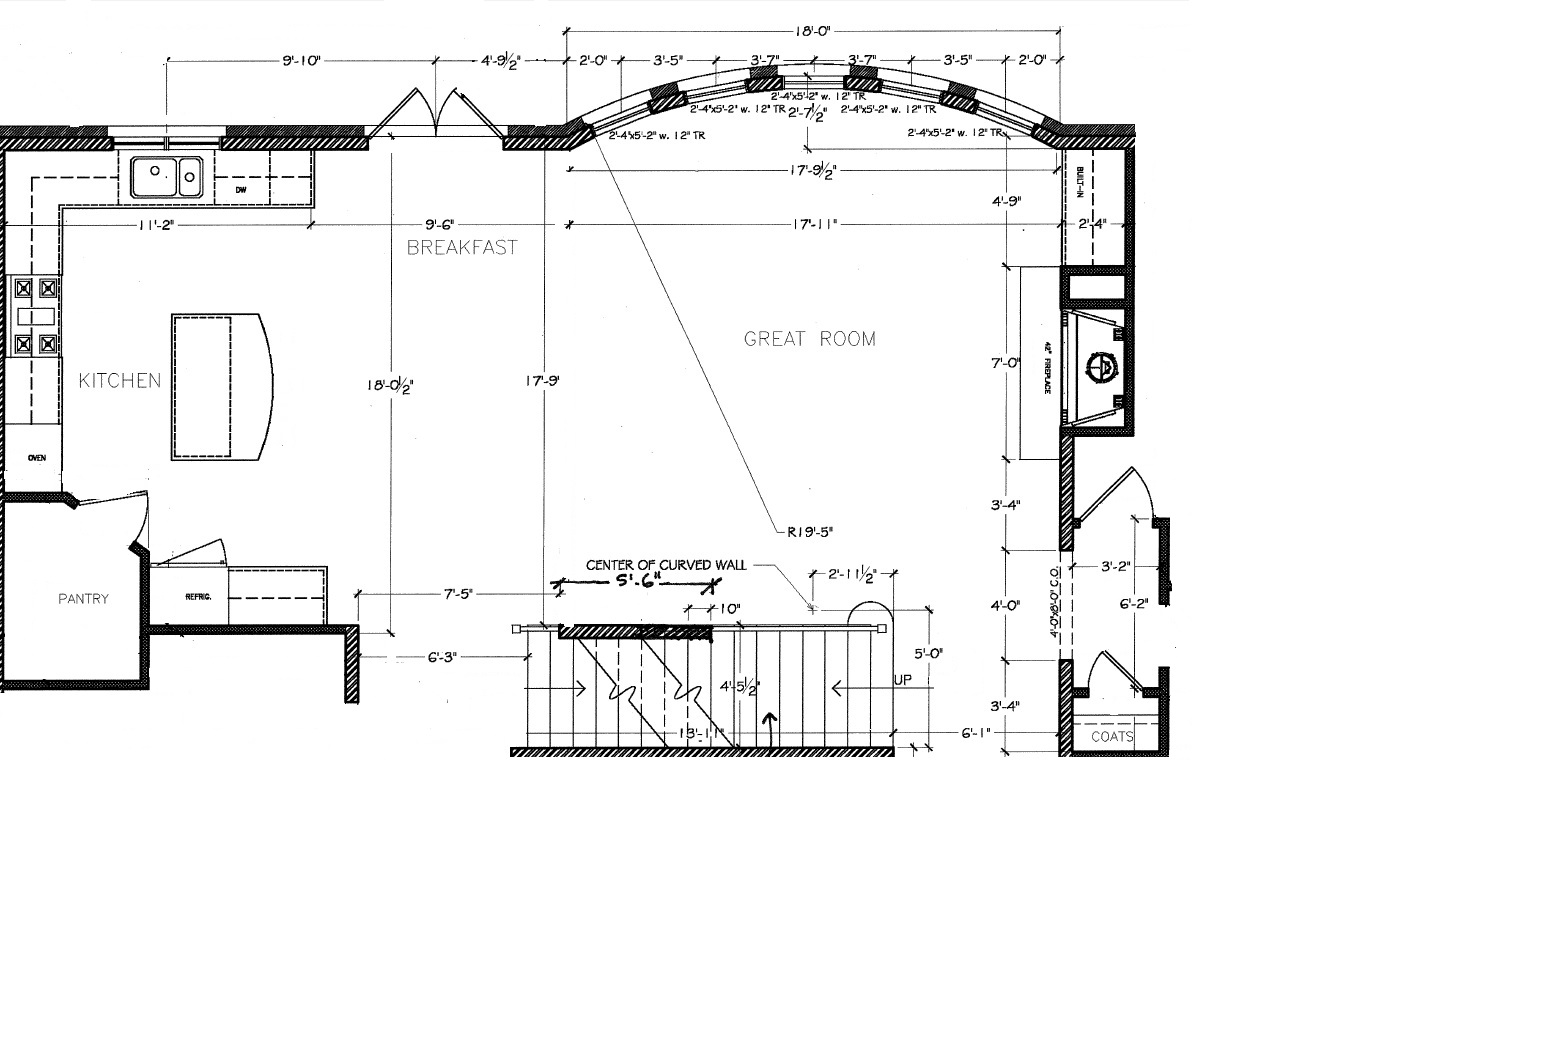 How To Draw A Fireplace In A Floor Plan floorplans.click